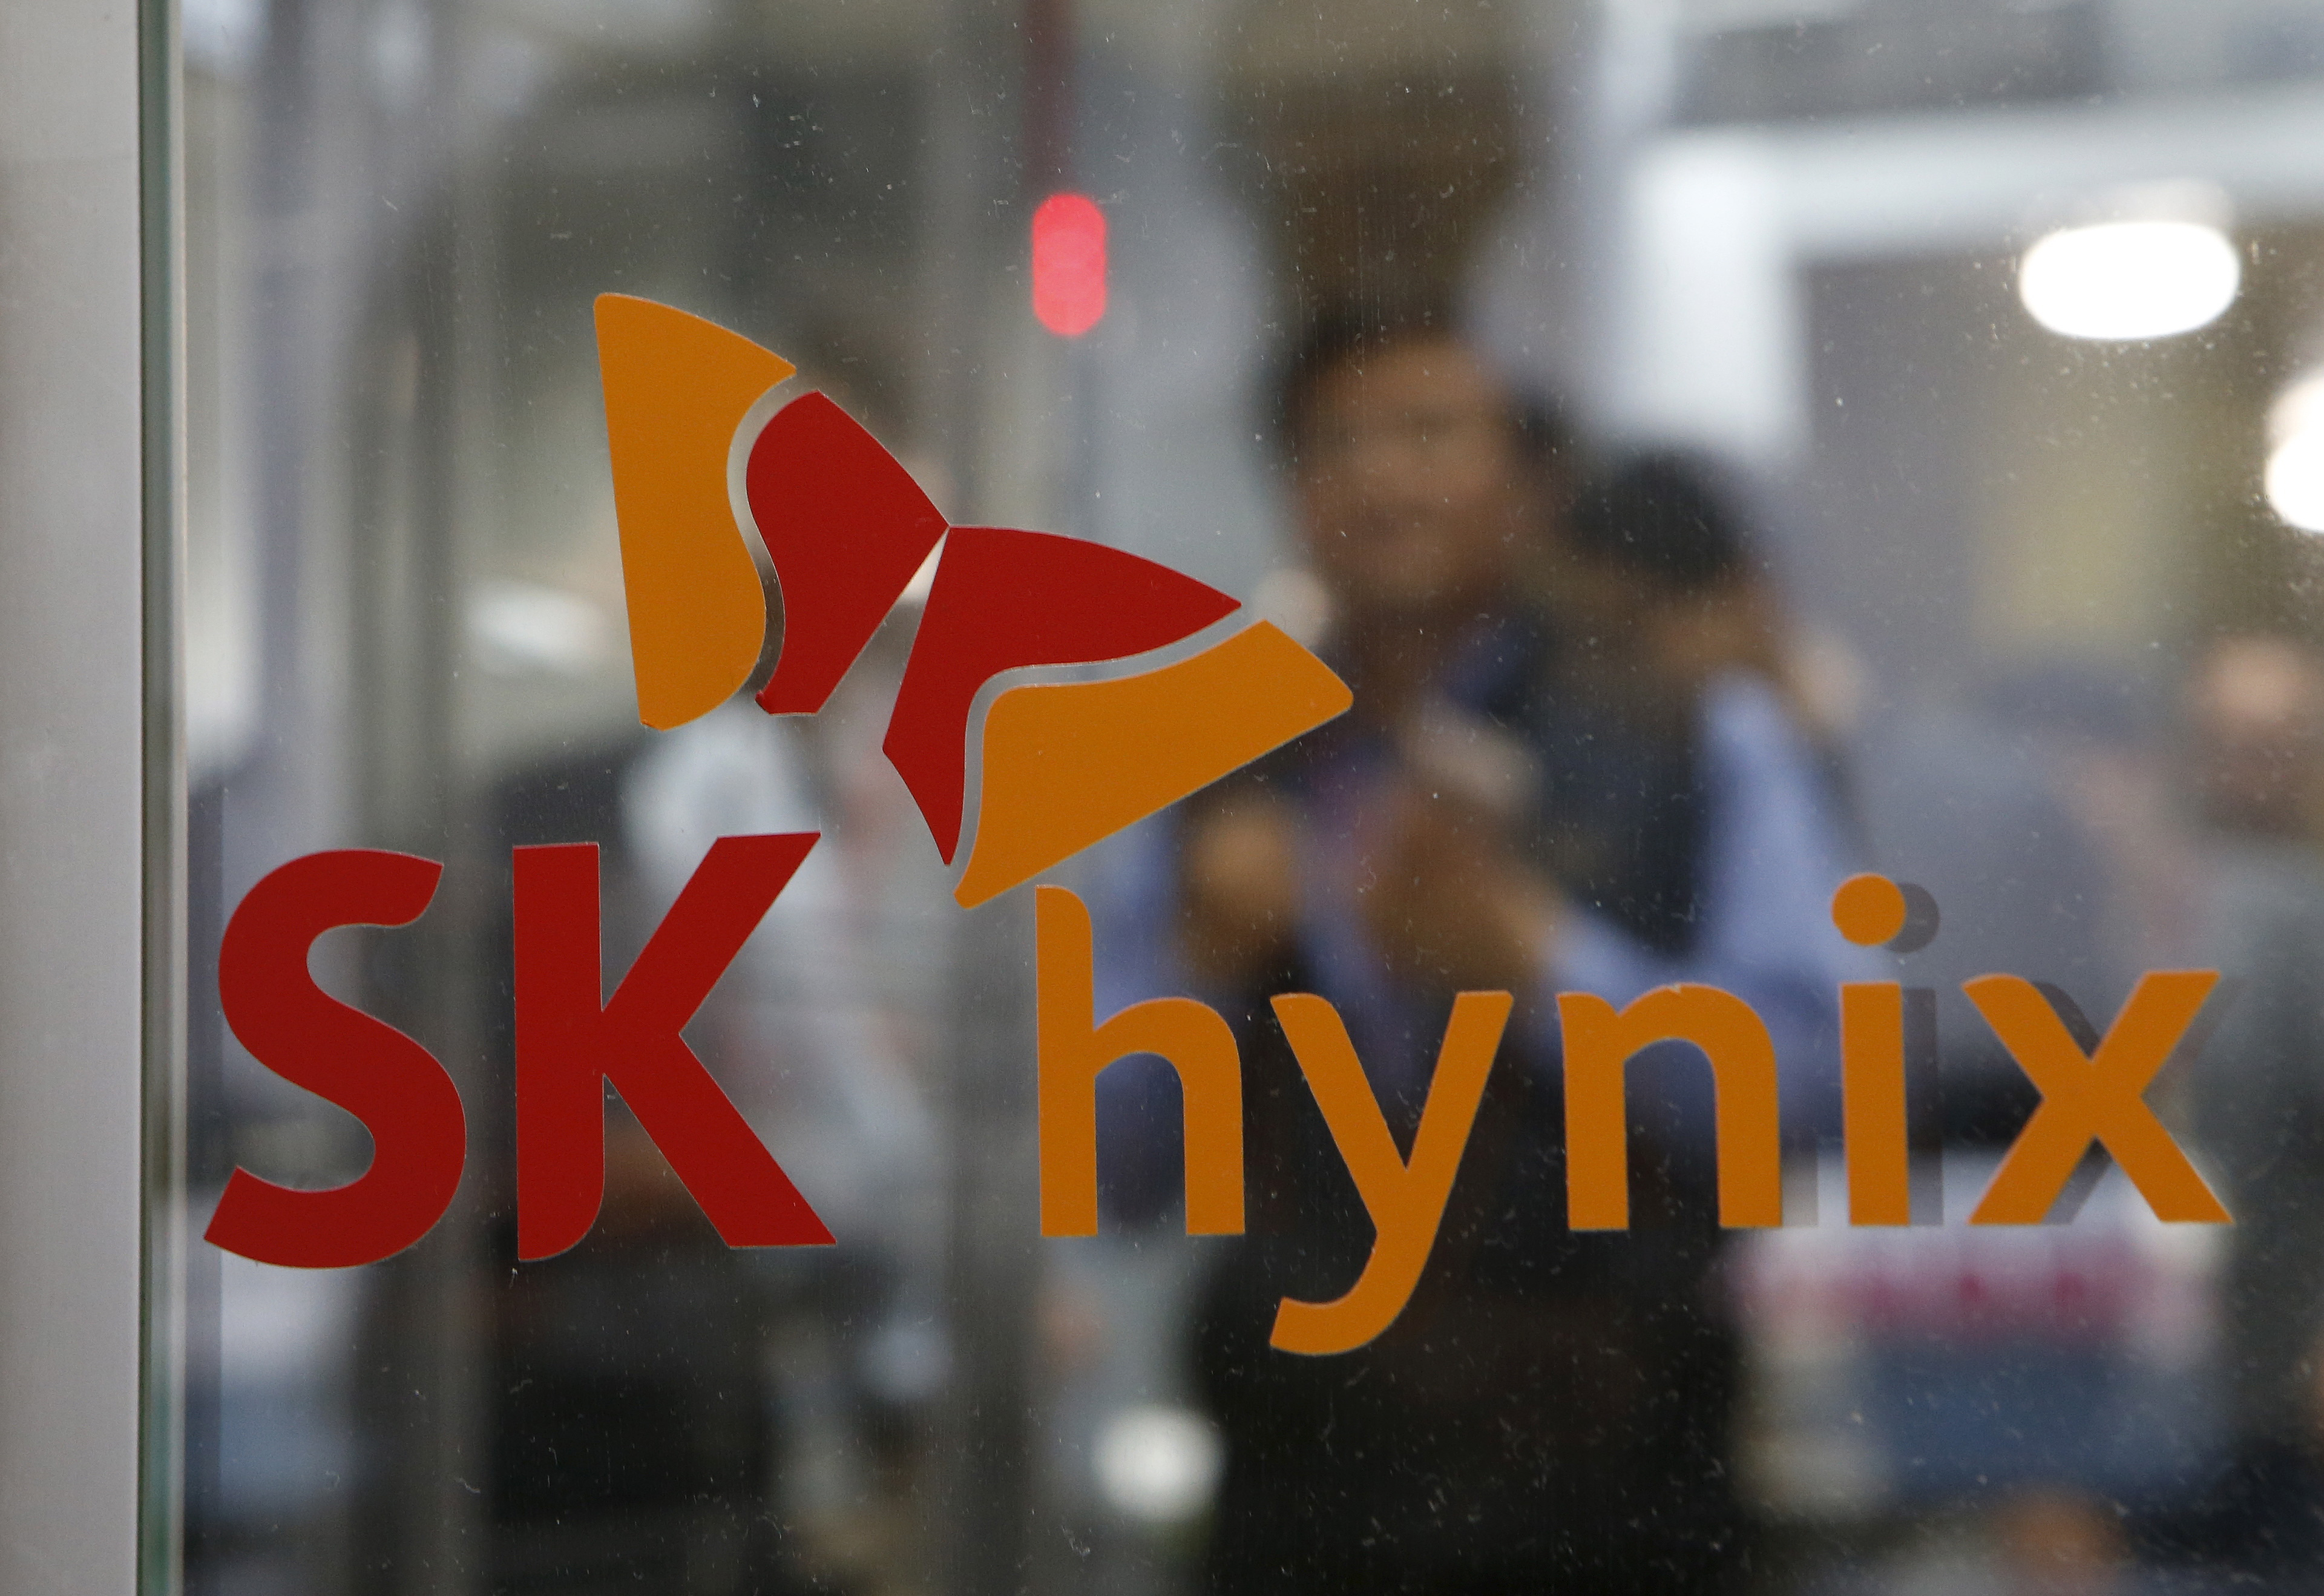 Employee walk past the logo of SK Hynix at its headquarters in Seongnam